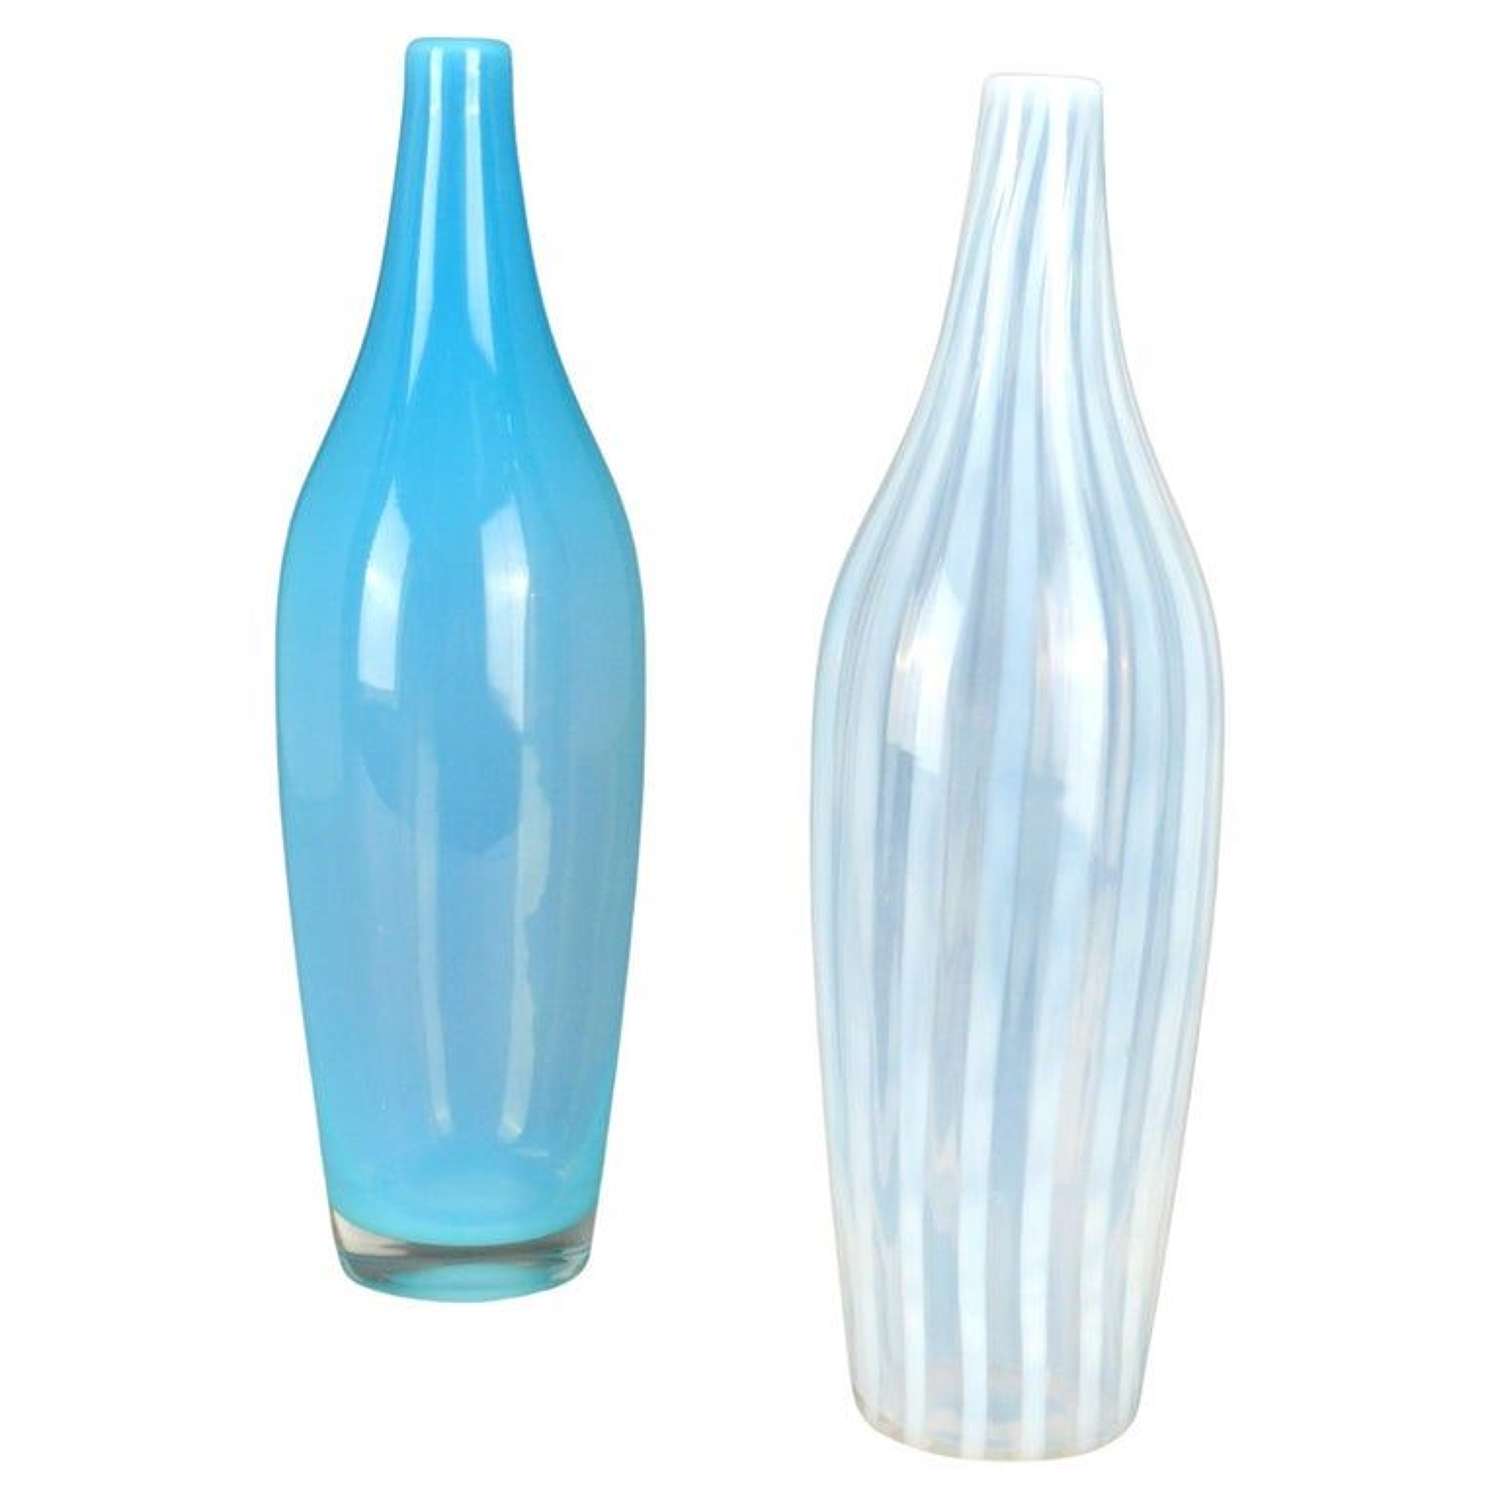 Blue and White Hand Blown Vases by Leerdam 1960's